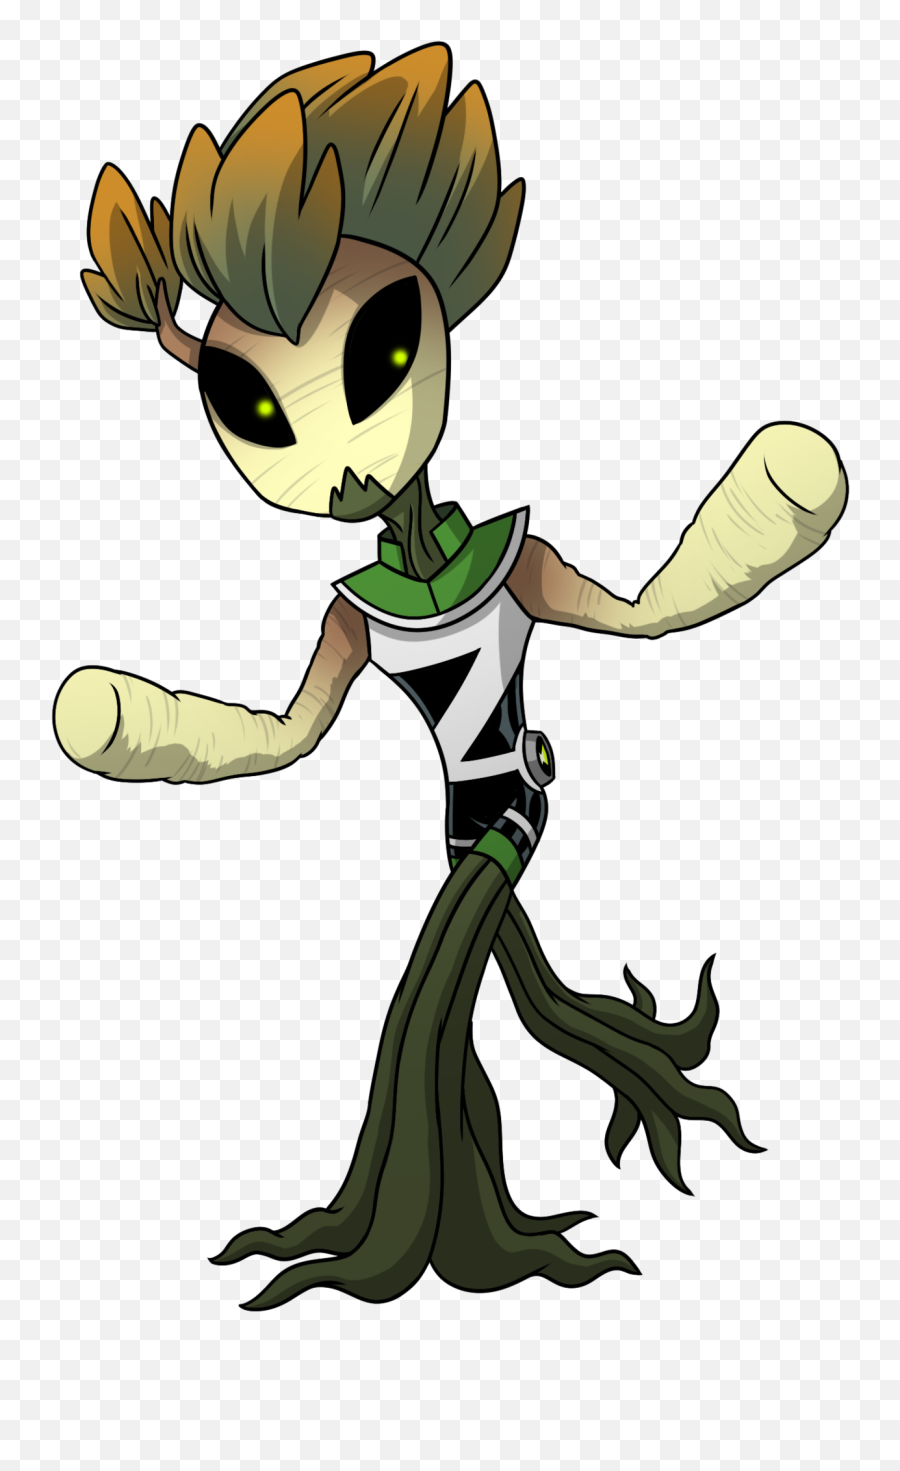 Truffle Is The Omnitrixs Dna Sample Of - Tuffle Ben Ten Emoji,Alien Whos Skin Changes Color With Emotion